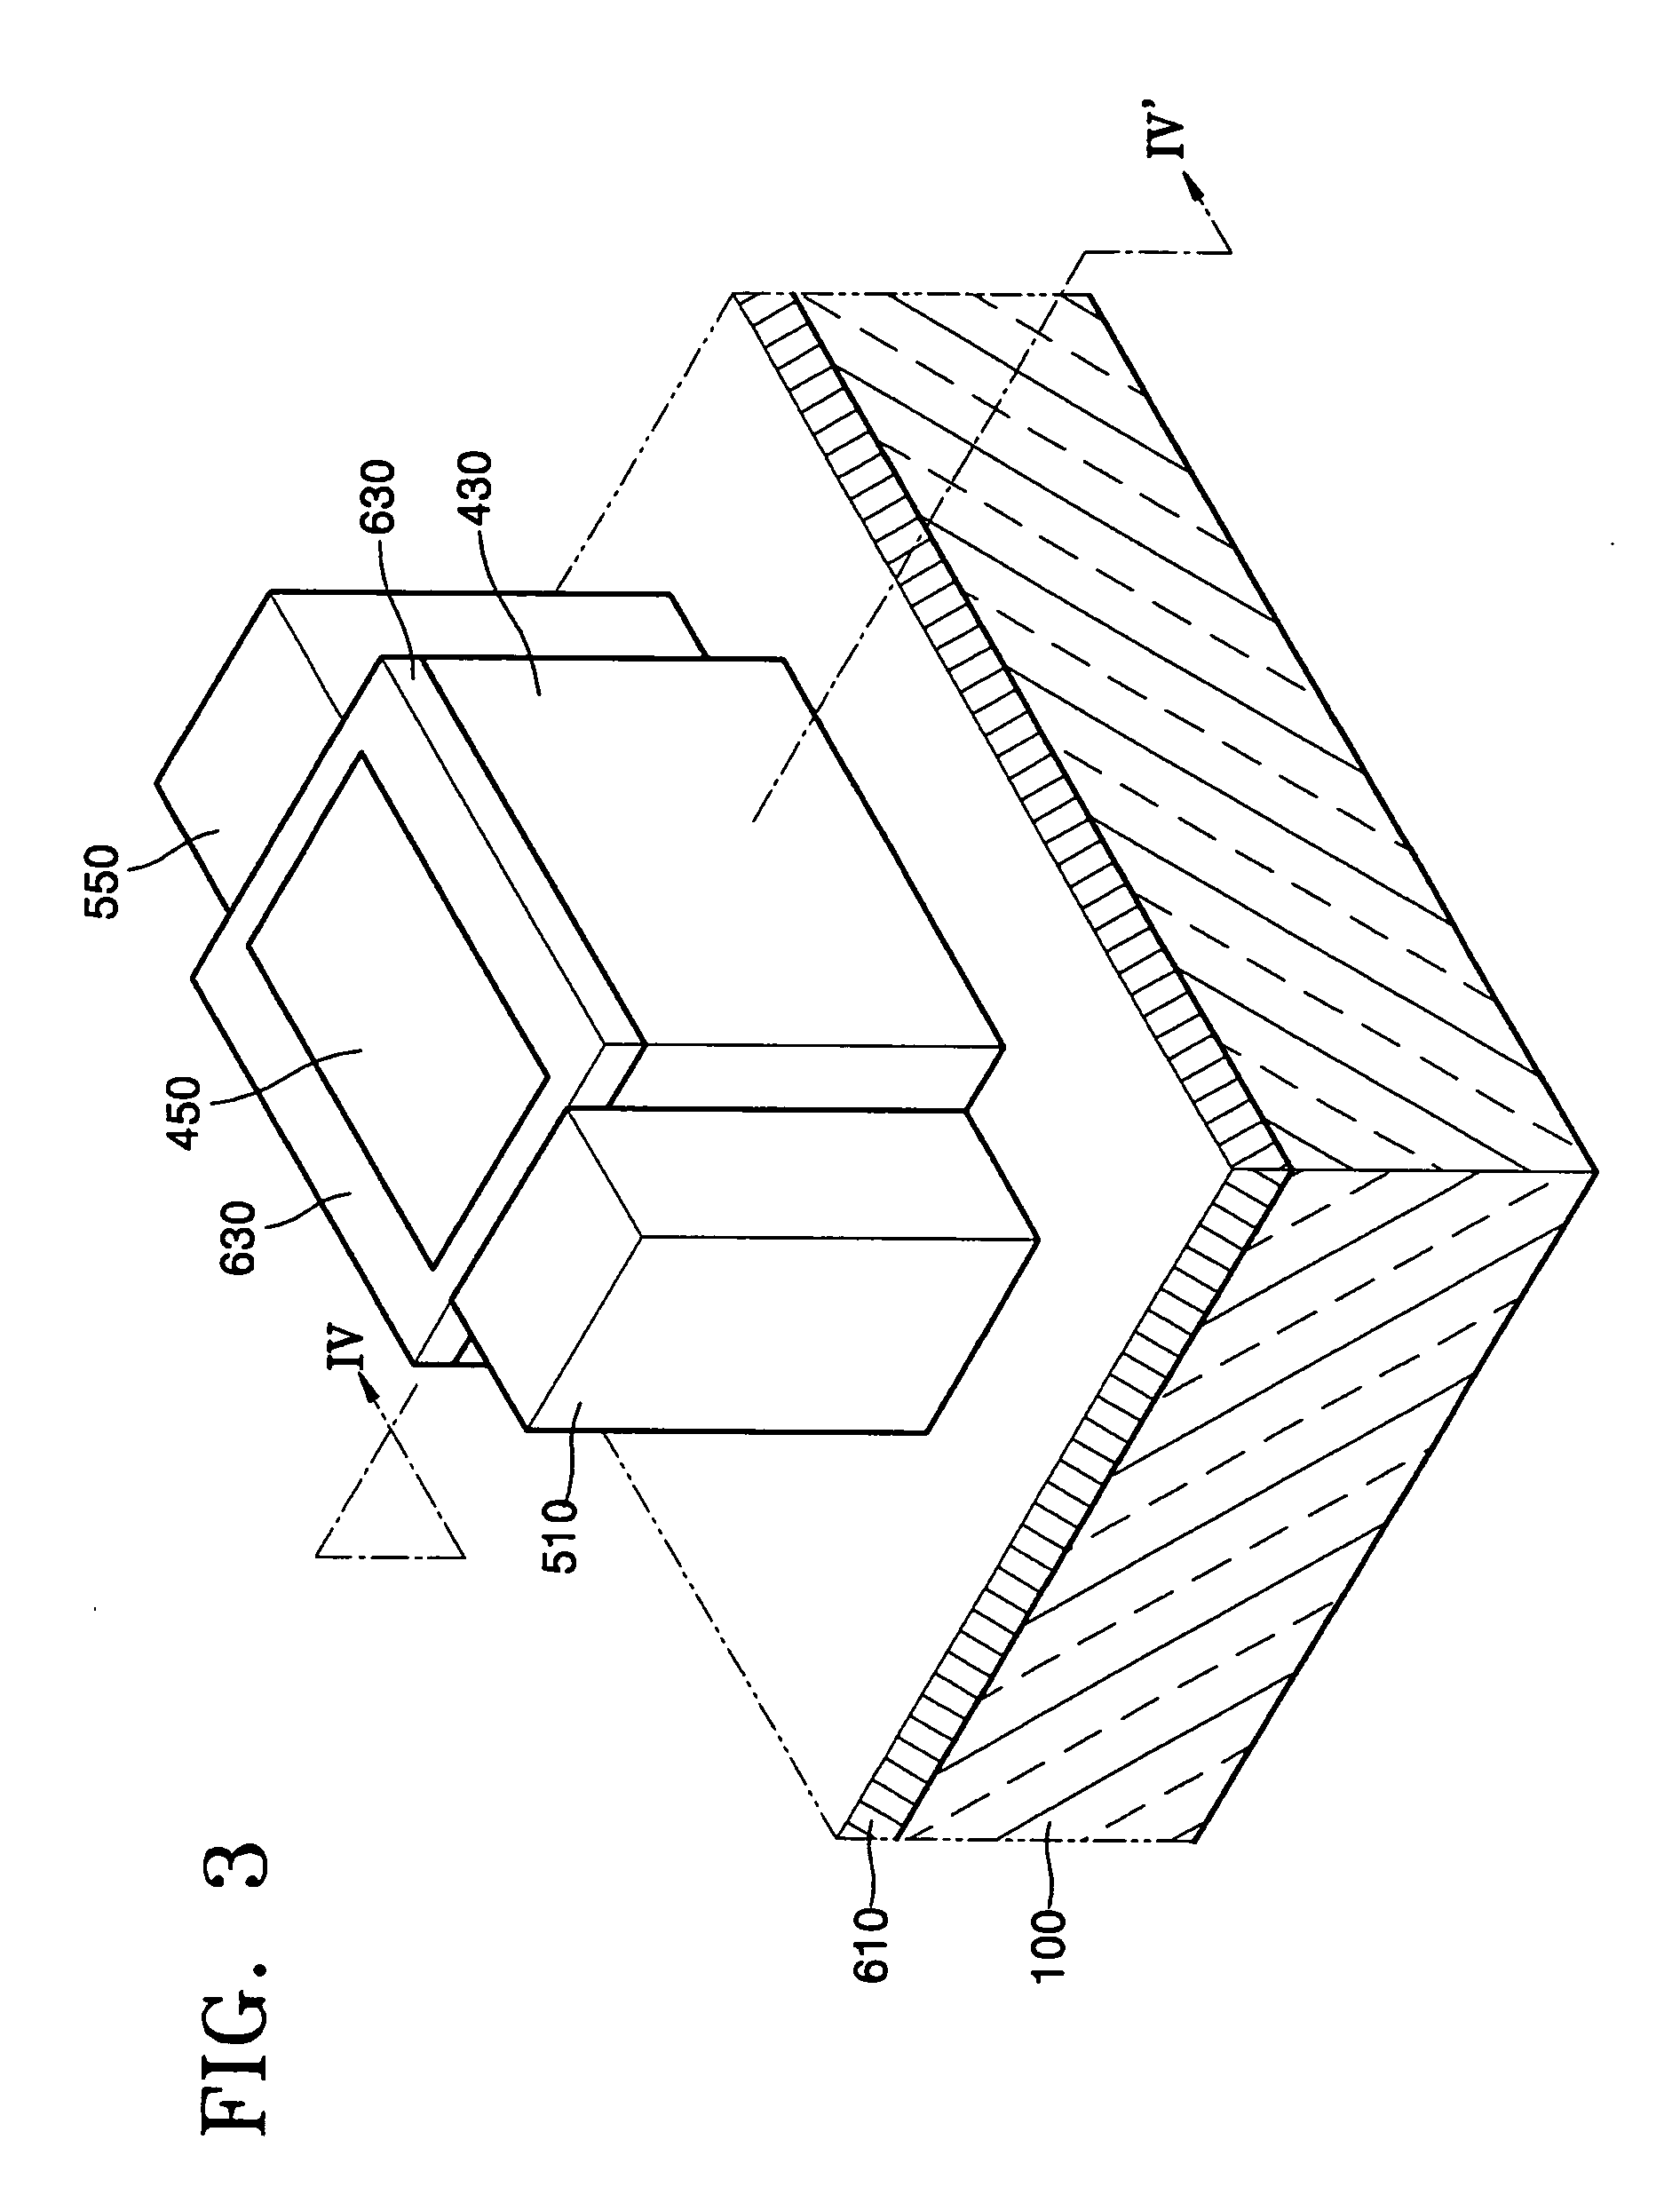 Multi bits flash memory device and method of operating the same